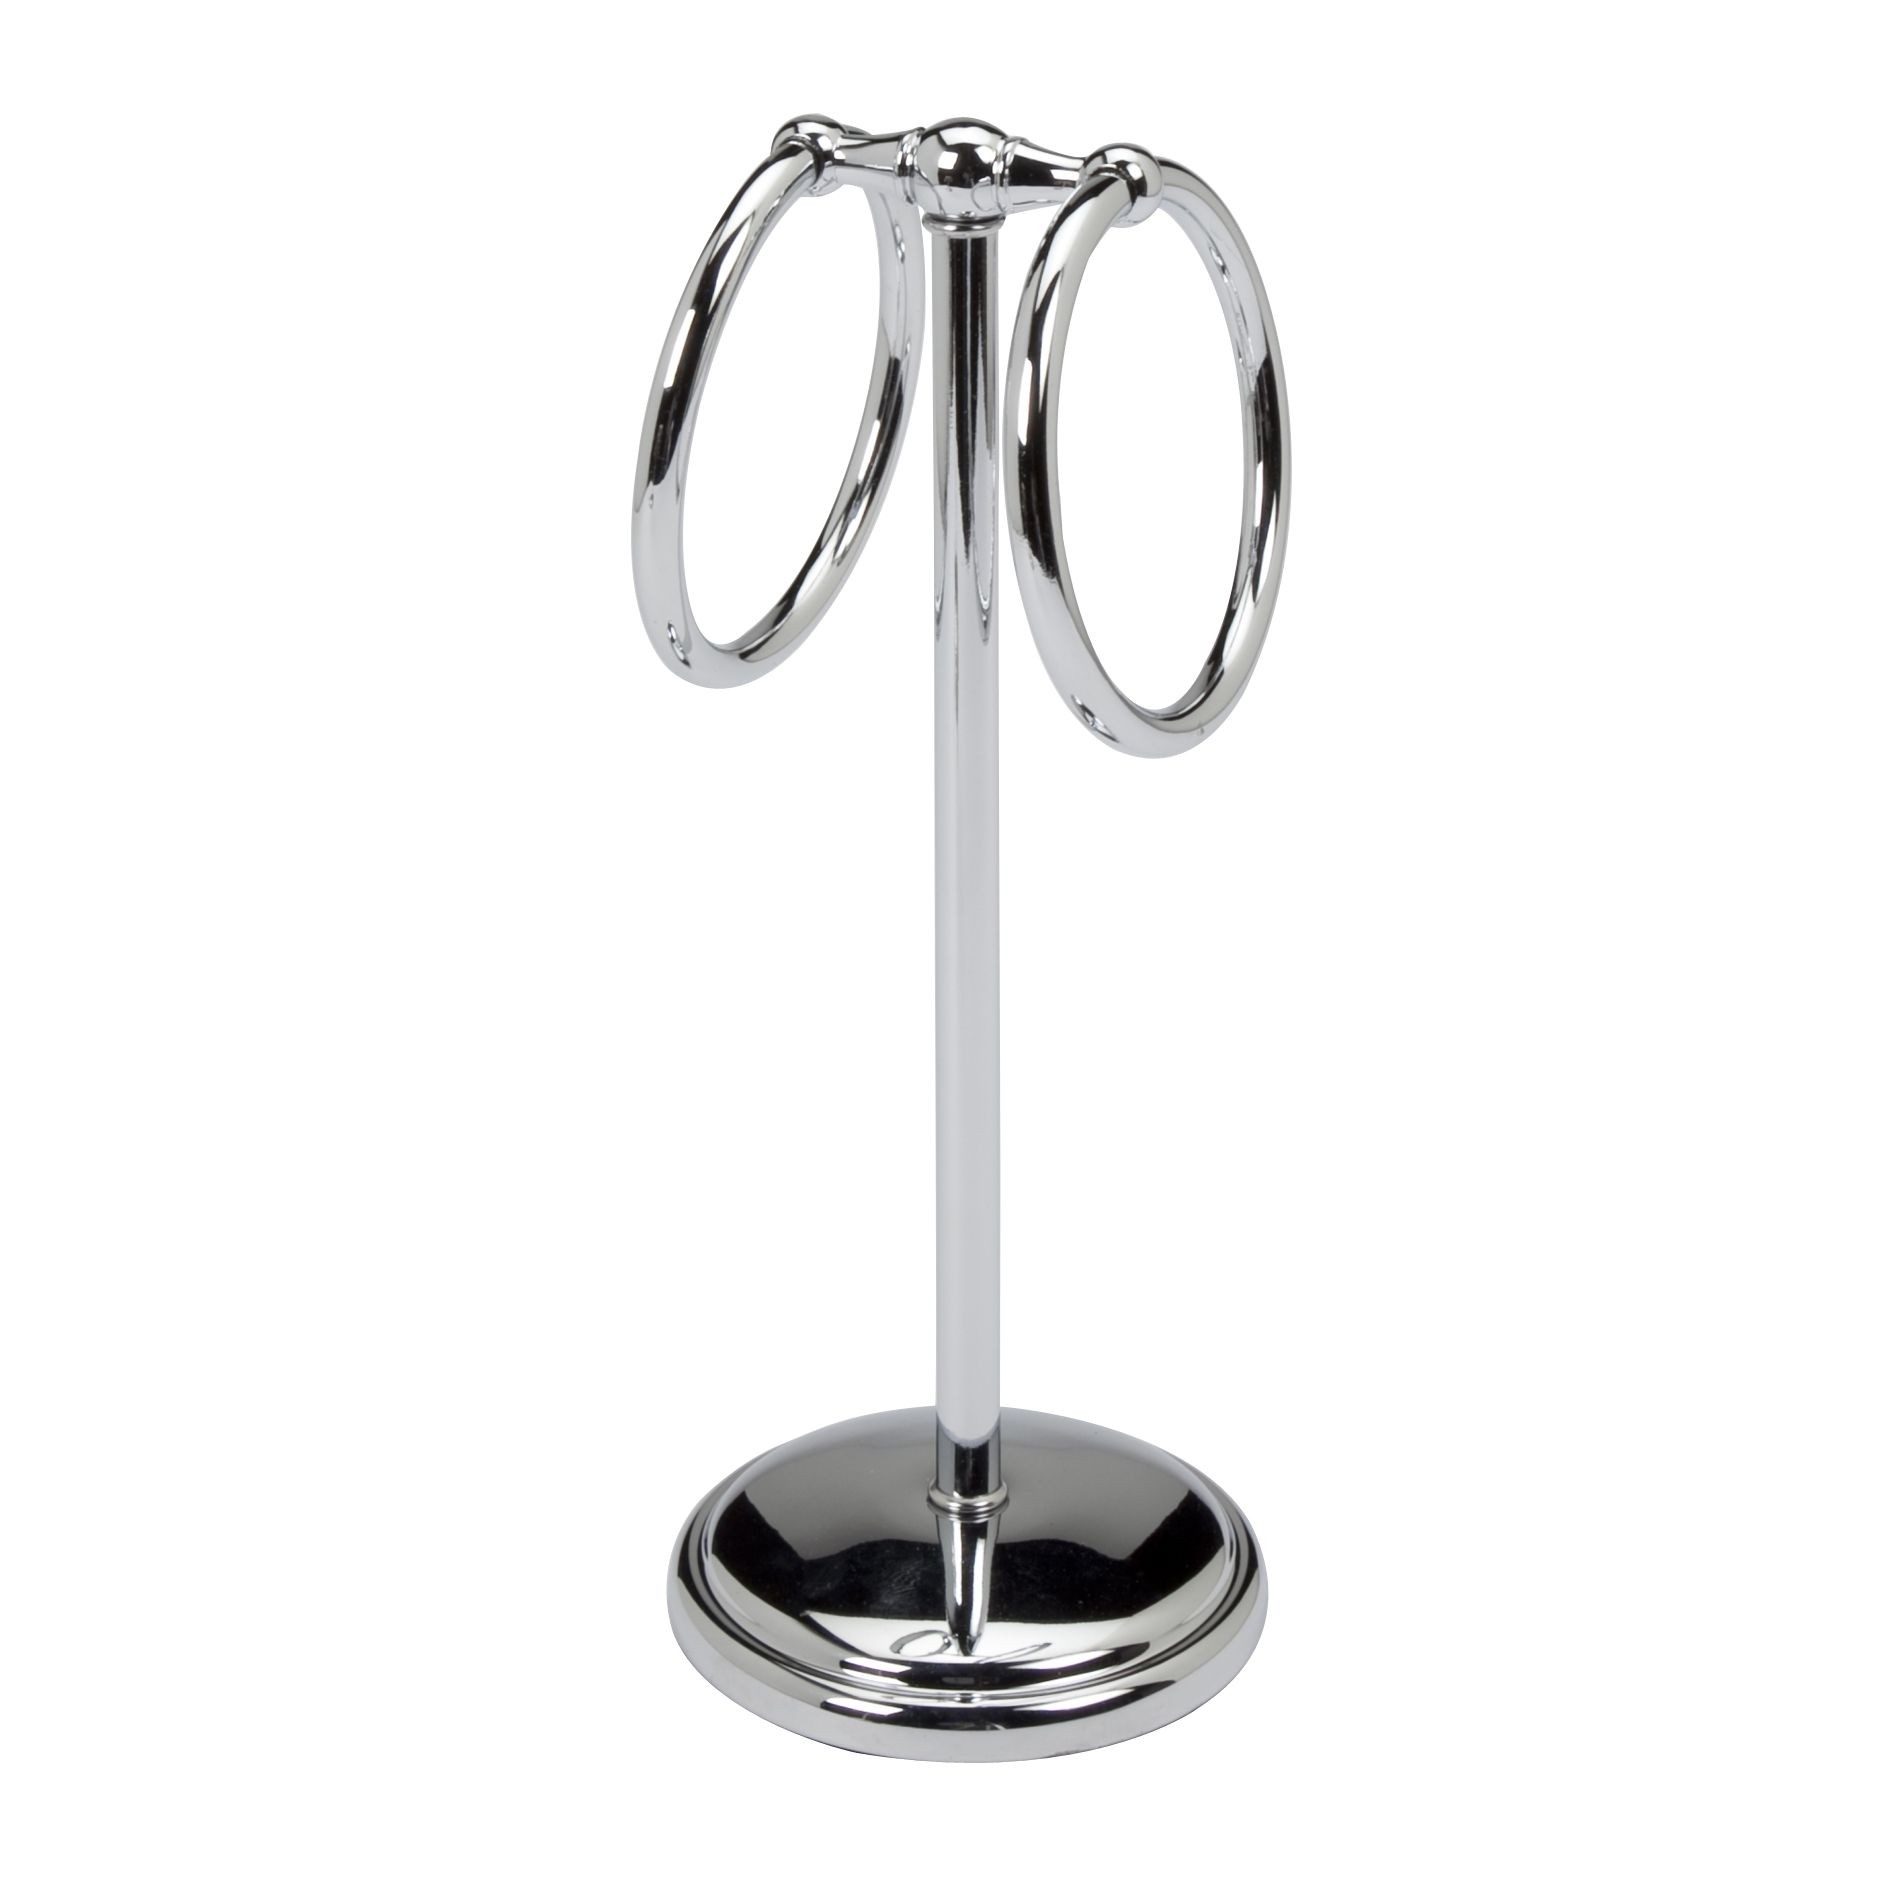 Essential home double ring guest towel stand chrome finish